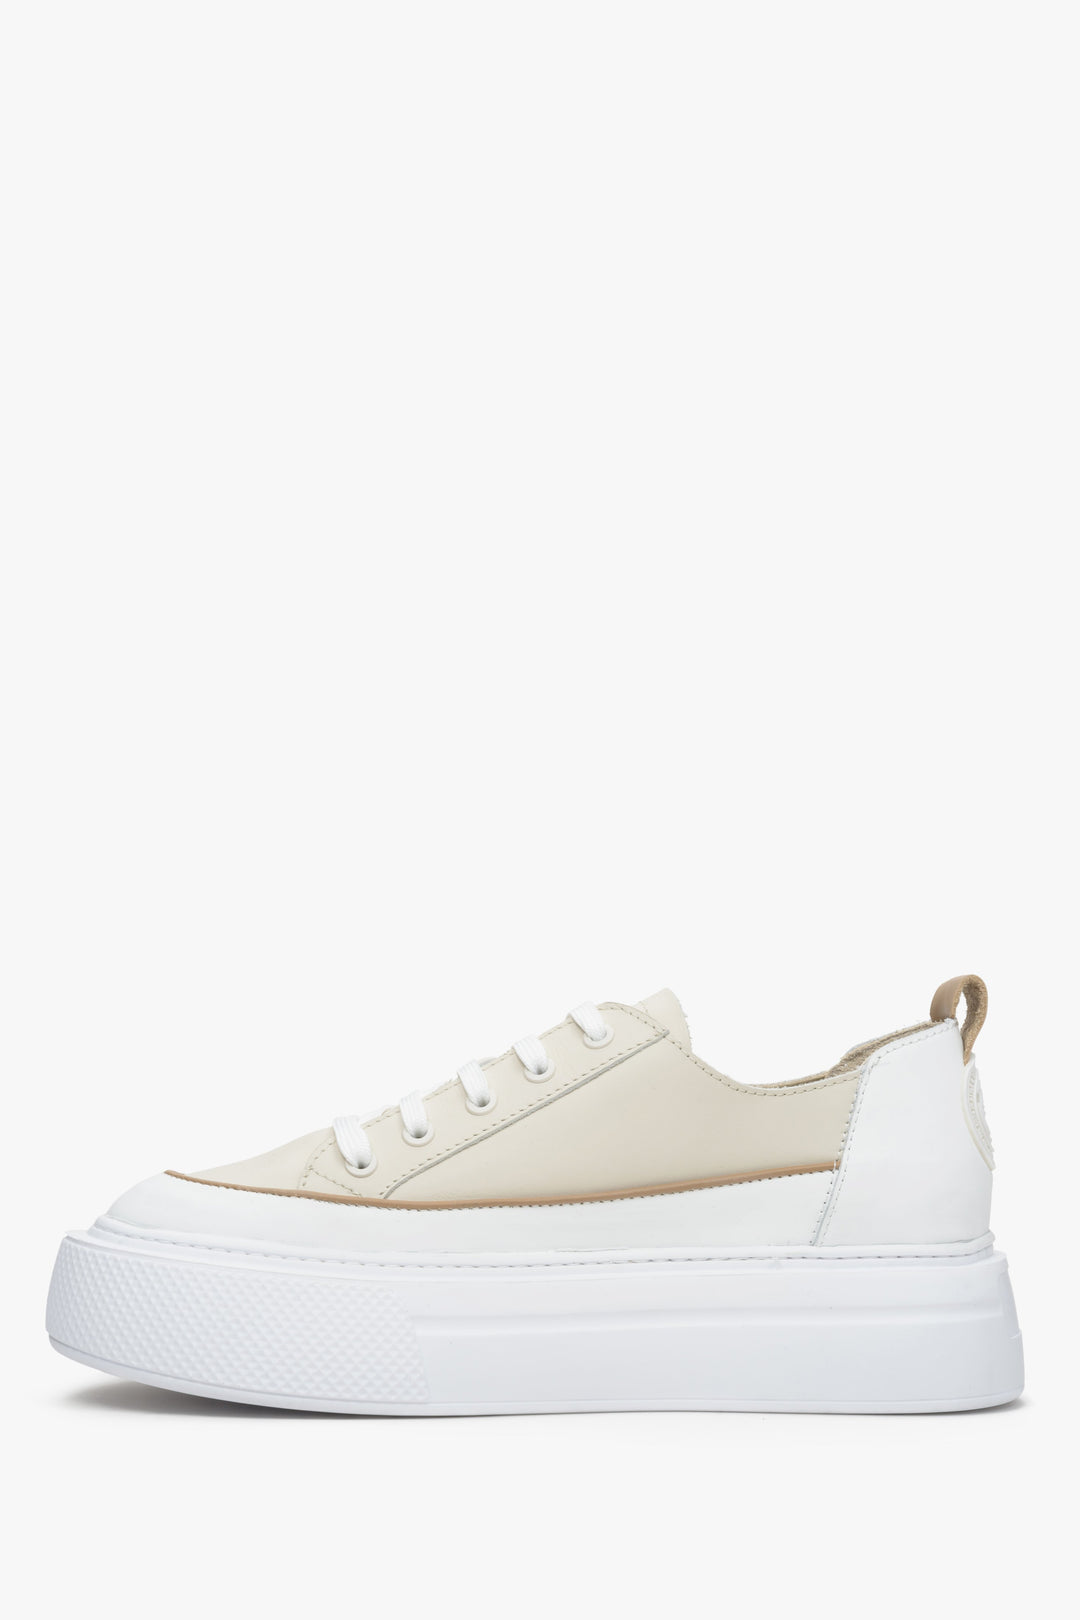 Beige & white women's low top sneakers made of natural leather - shoe profile.